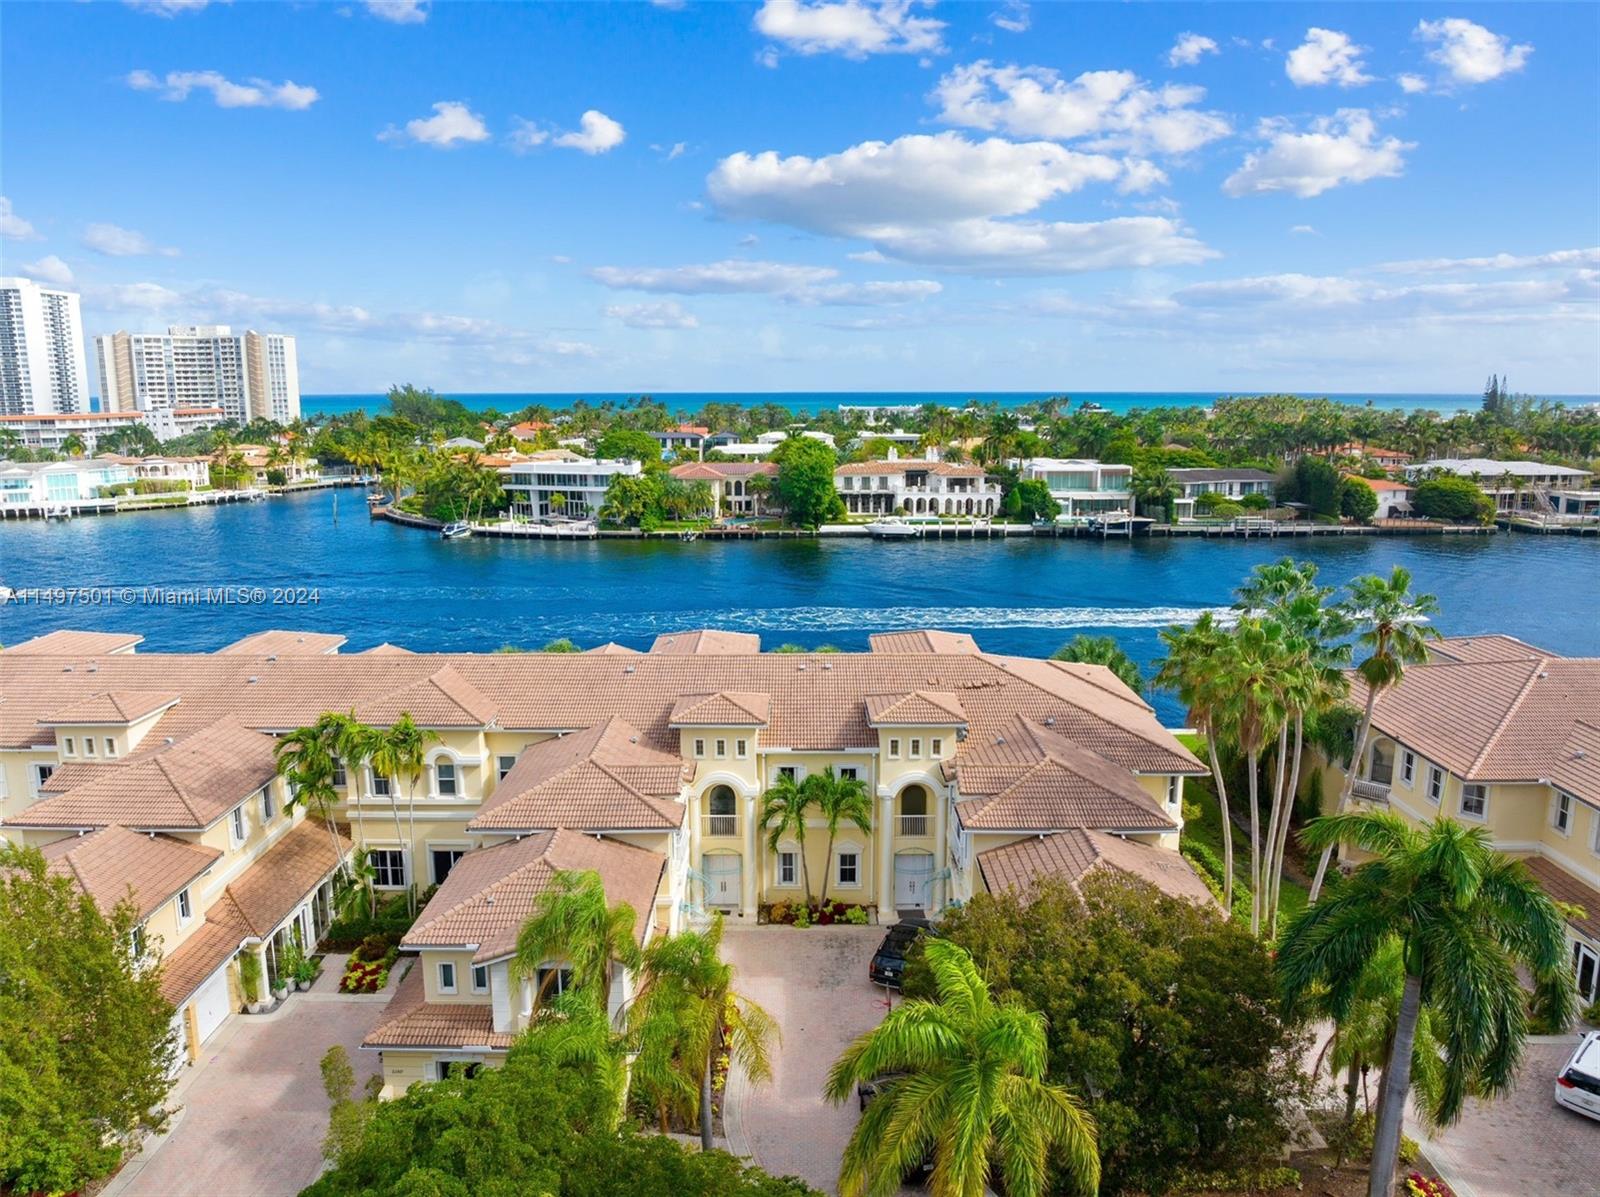 This is an intracoastal WATERFRONT jewel situated at The Point of Aventura. 

Enjoy this coveted intracoastal townhome with a pool. Recently remodeled, the home features an open kitchen, beautiful marble glass flooring, an elegant glass/wood staircase, and 3 HUGE bedrooms. A LARGE third bedroom can easily be converted into 2 bedrooms to make this a 4 bedroom, 4.5 bath home. Airy soaring ceilings and natural light range throughout.

The Point of Aventura features a 25000 square foot high-tech fitness center with a men's and women's spa, jacuzzi, steam room, sauna and salon. AMENITIES include 4 clay tennis courts, 1 large Intracoastal Pool, 2 additional resort-style pools, a ballroom, a children's playground and 2 cafes! 

Get your family ready for this one-of-a-kind home/community!